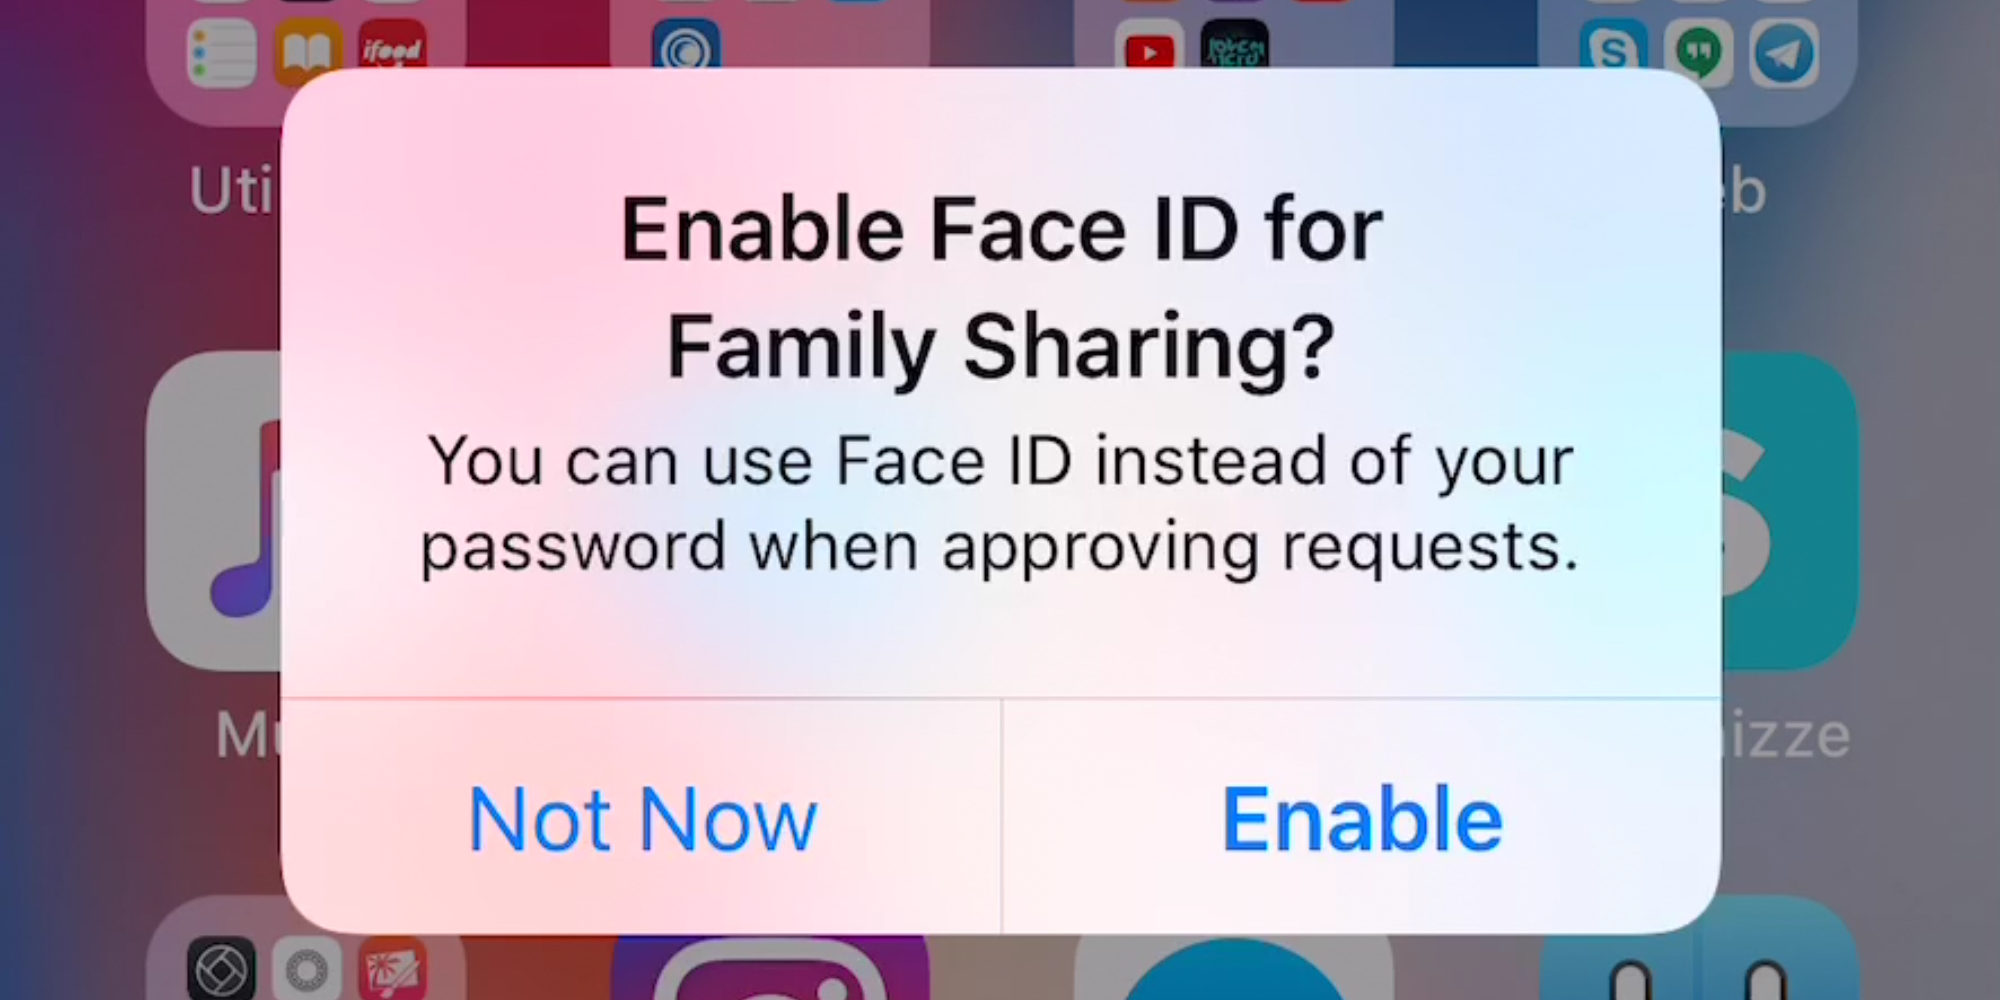 iOS 11.3 Will Allow Parents to Approve Family Purchases Using Face ID